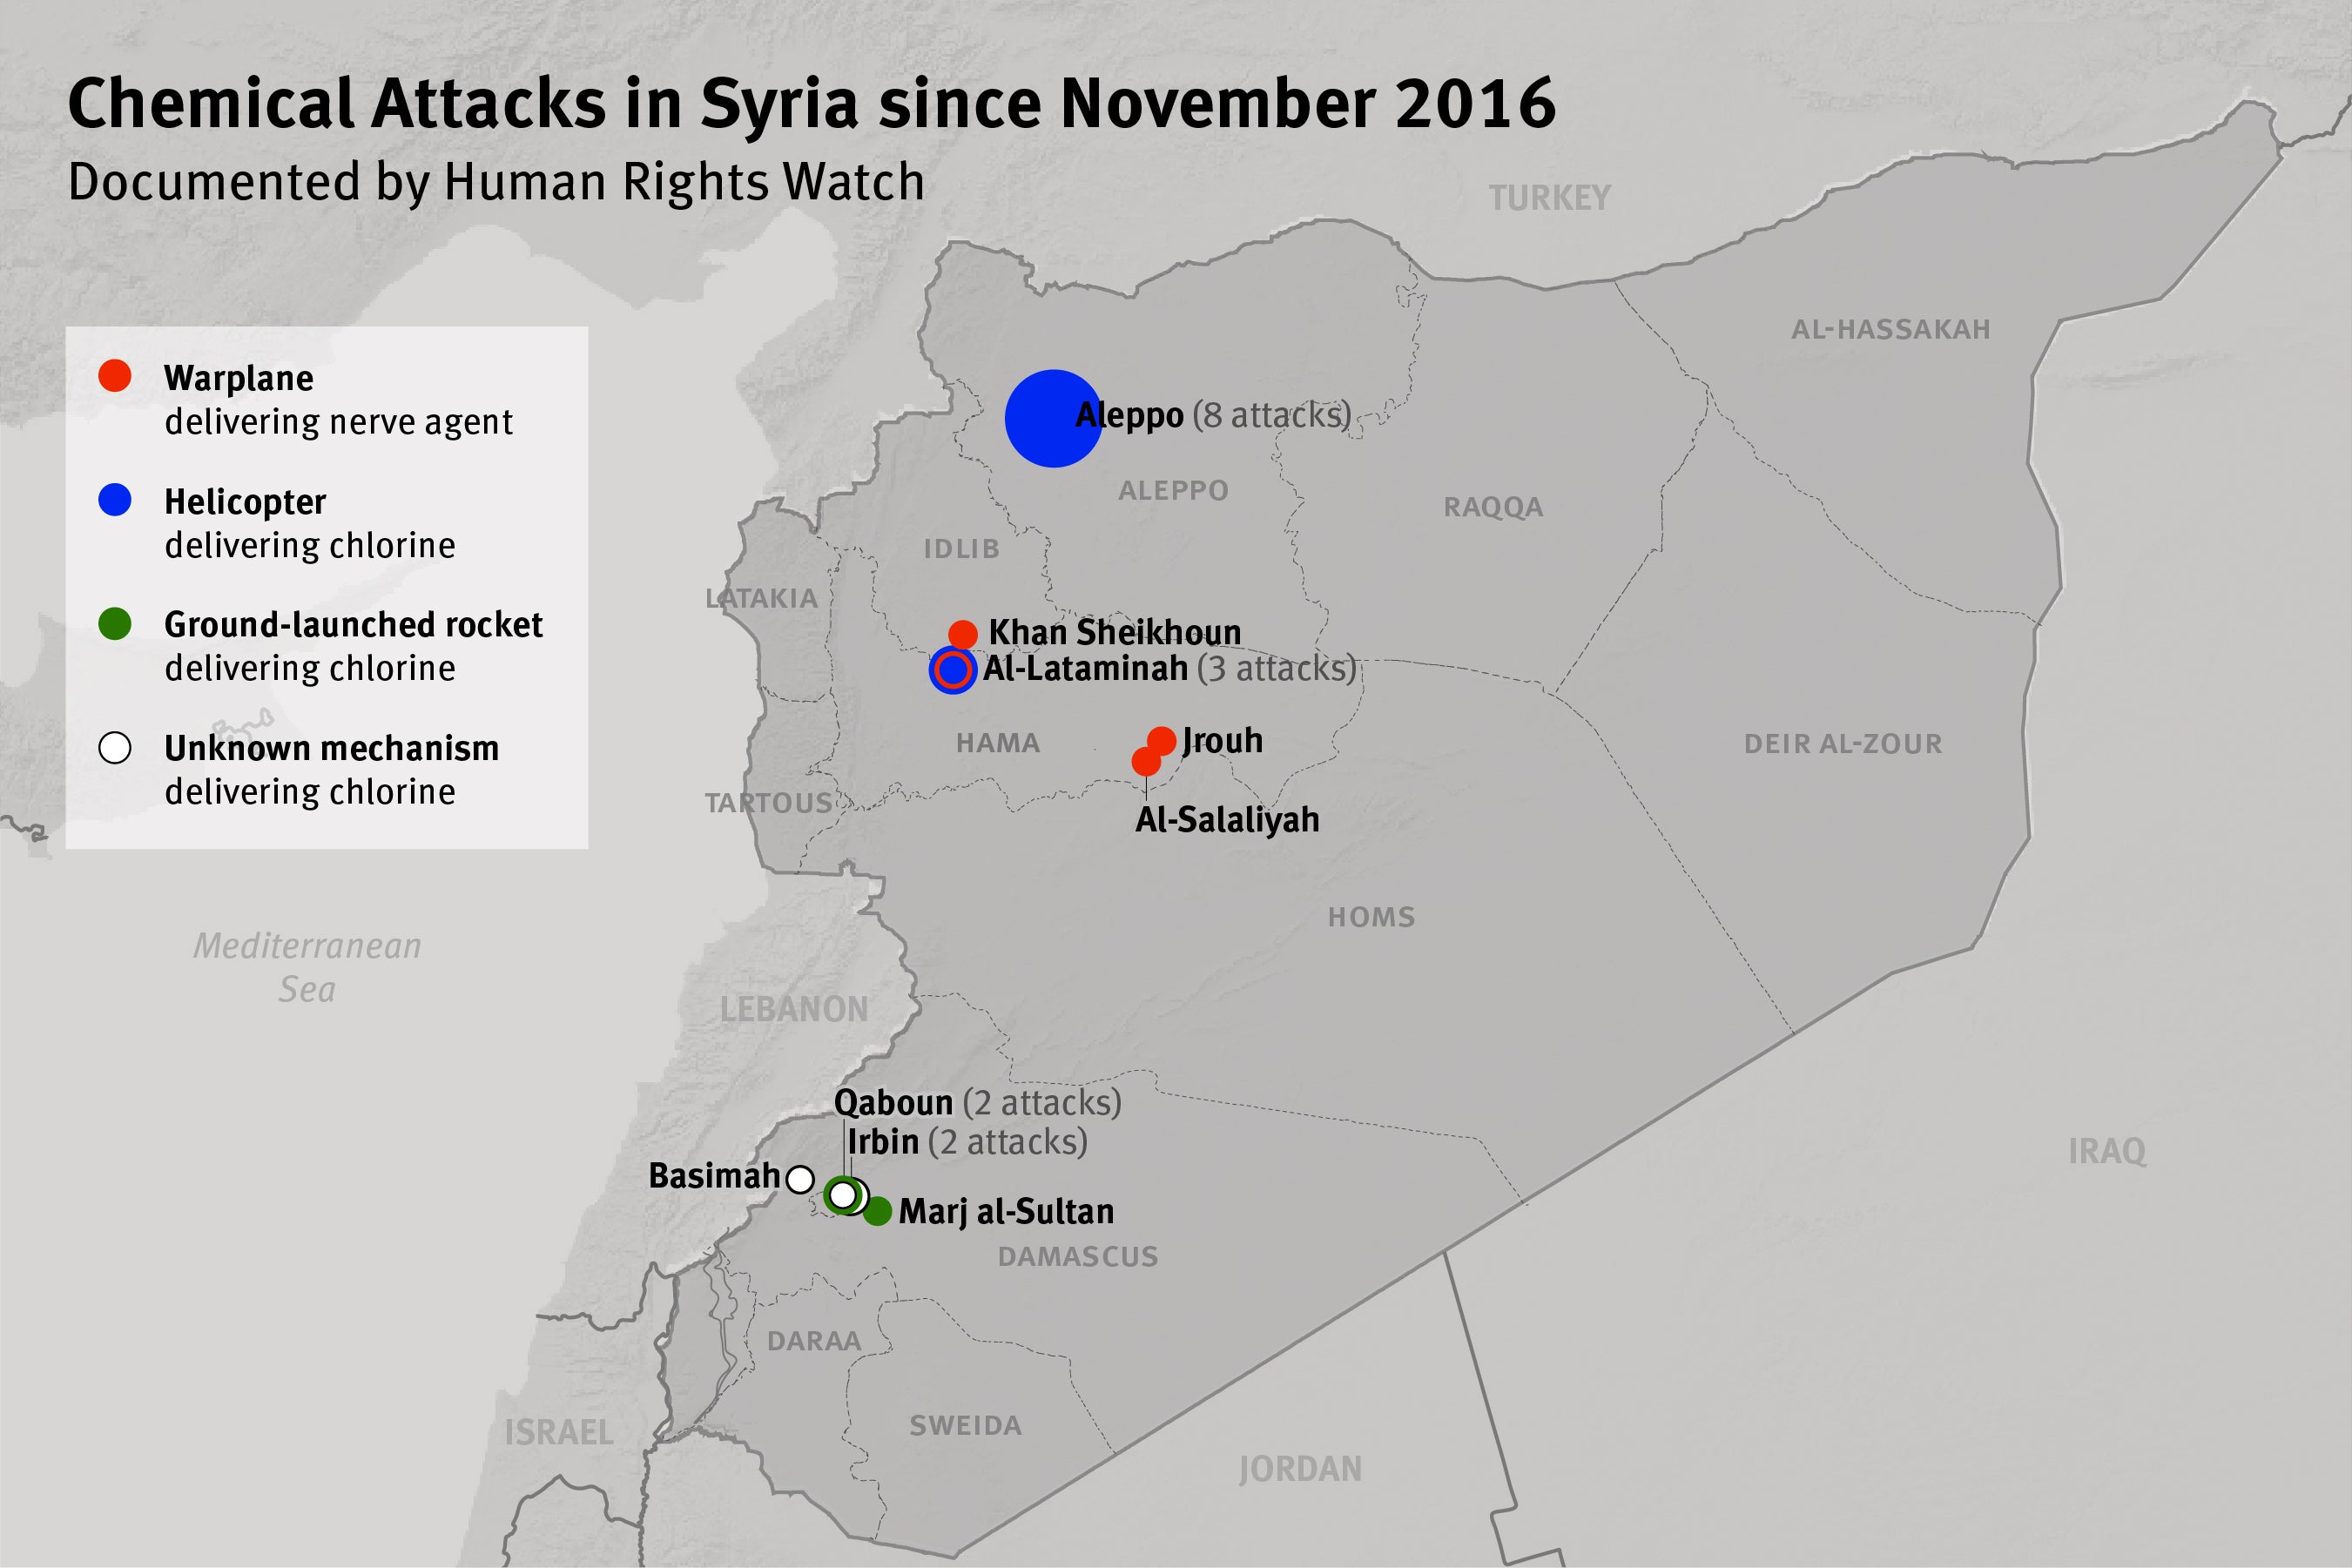 Map of Chemical Attacks in Syria since November 2016